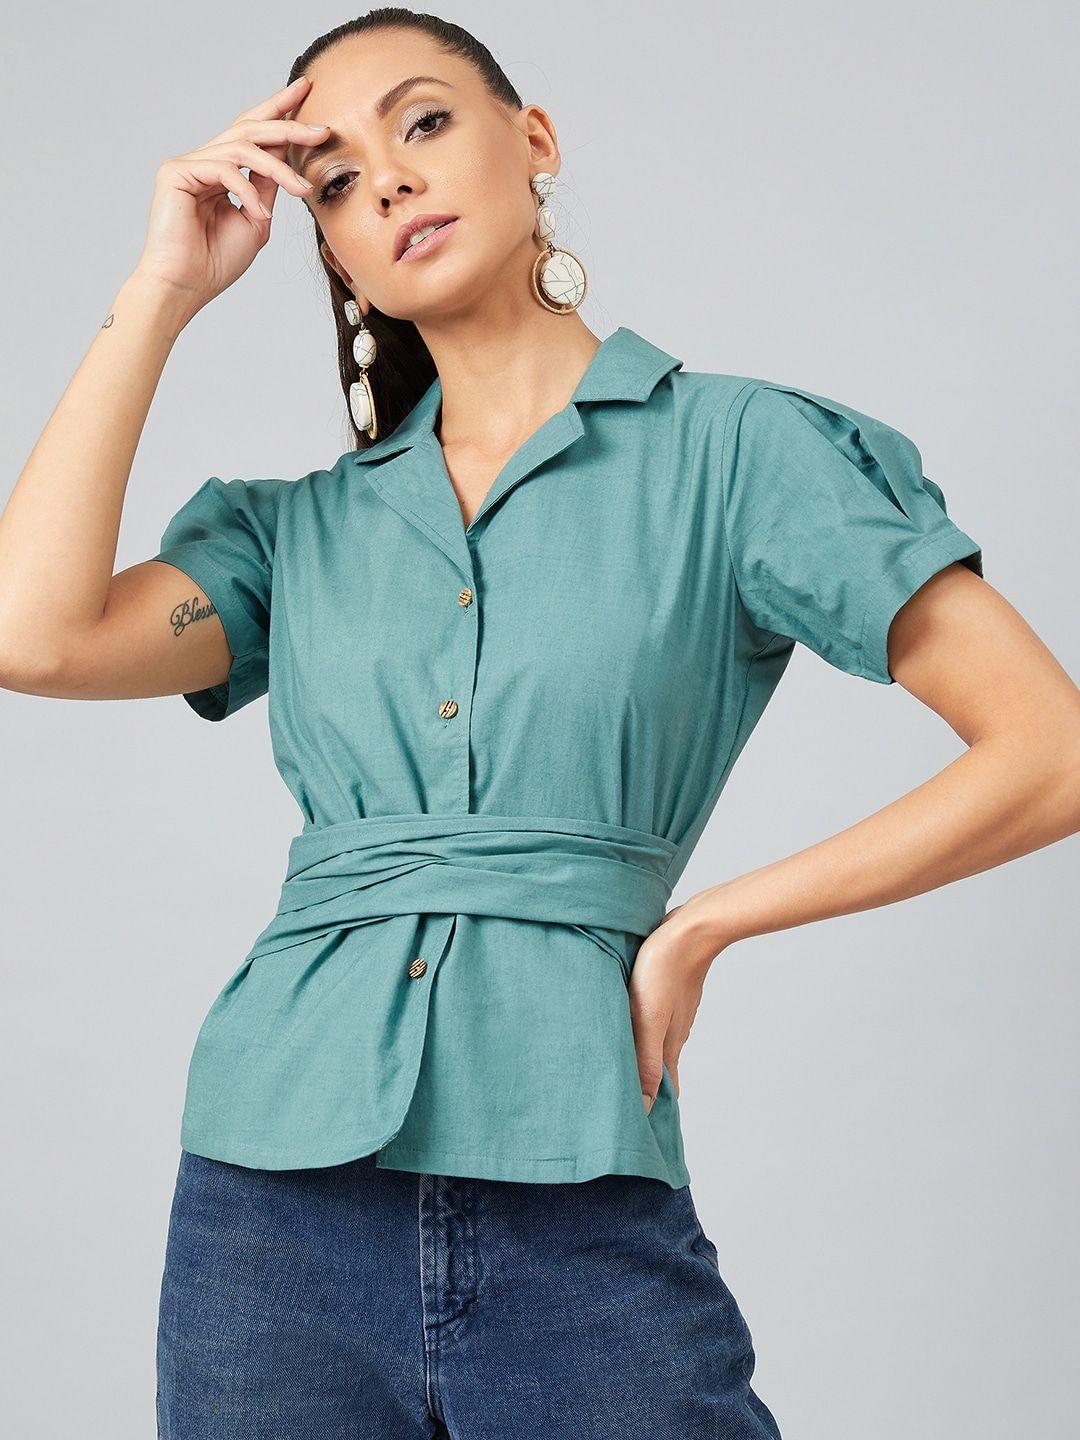 athena women teal green solid shirt style top with waist tie-up